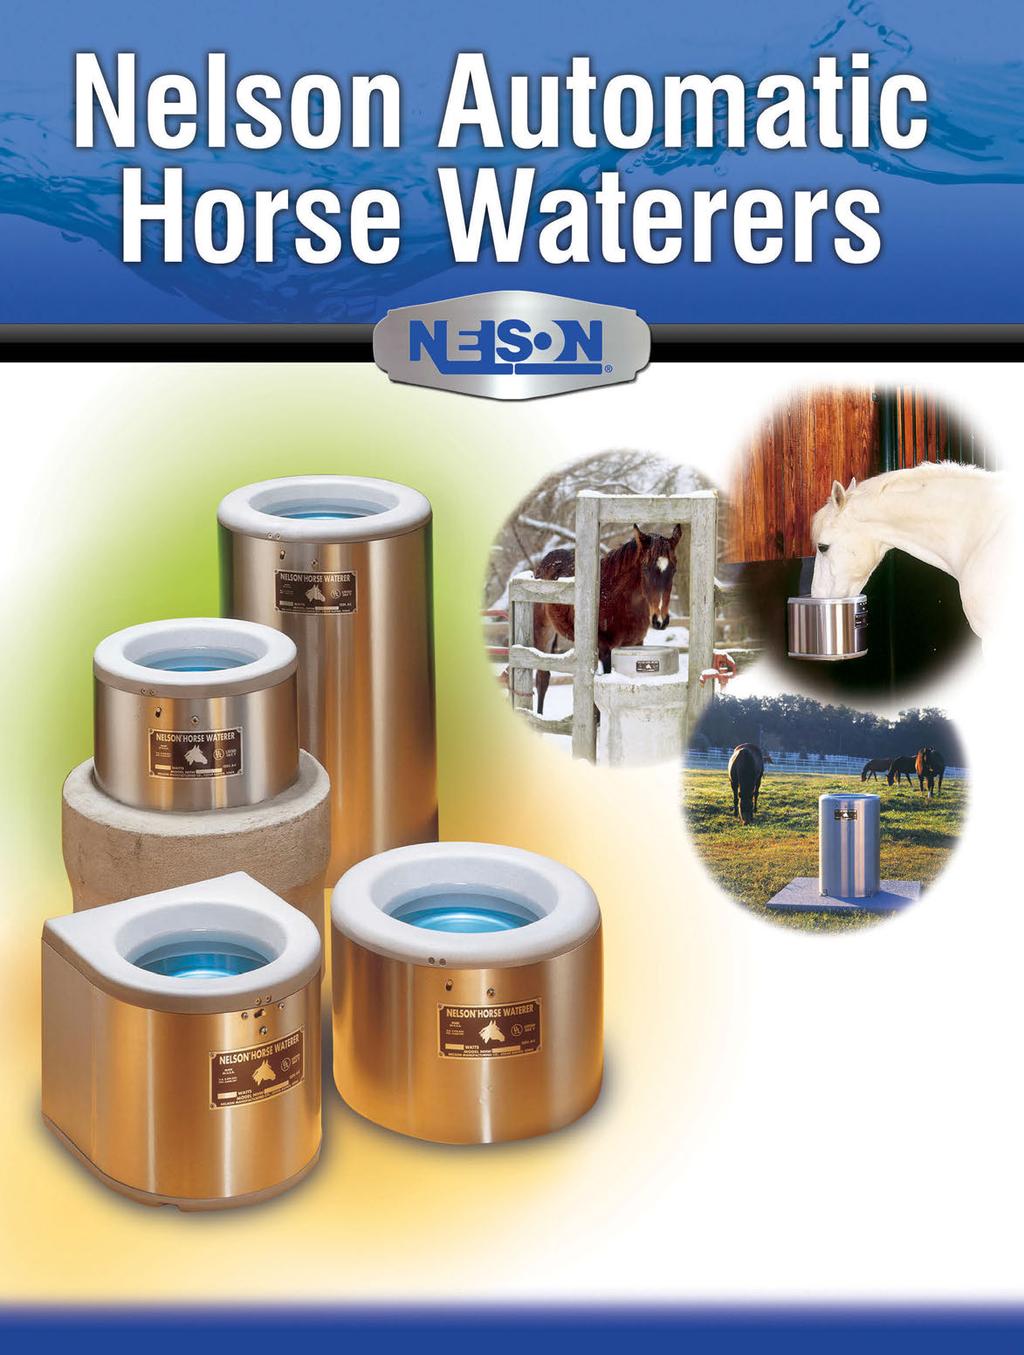 Stainless steel throughout, Nelson Automatic Waterers are durable, easy to clean and available with optional heaters for